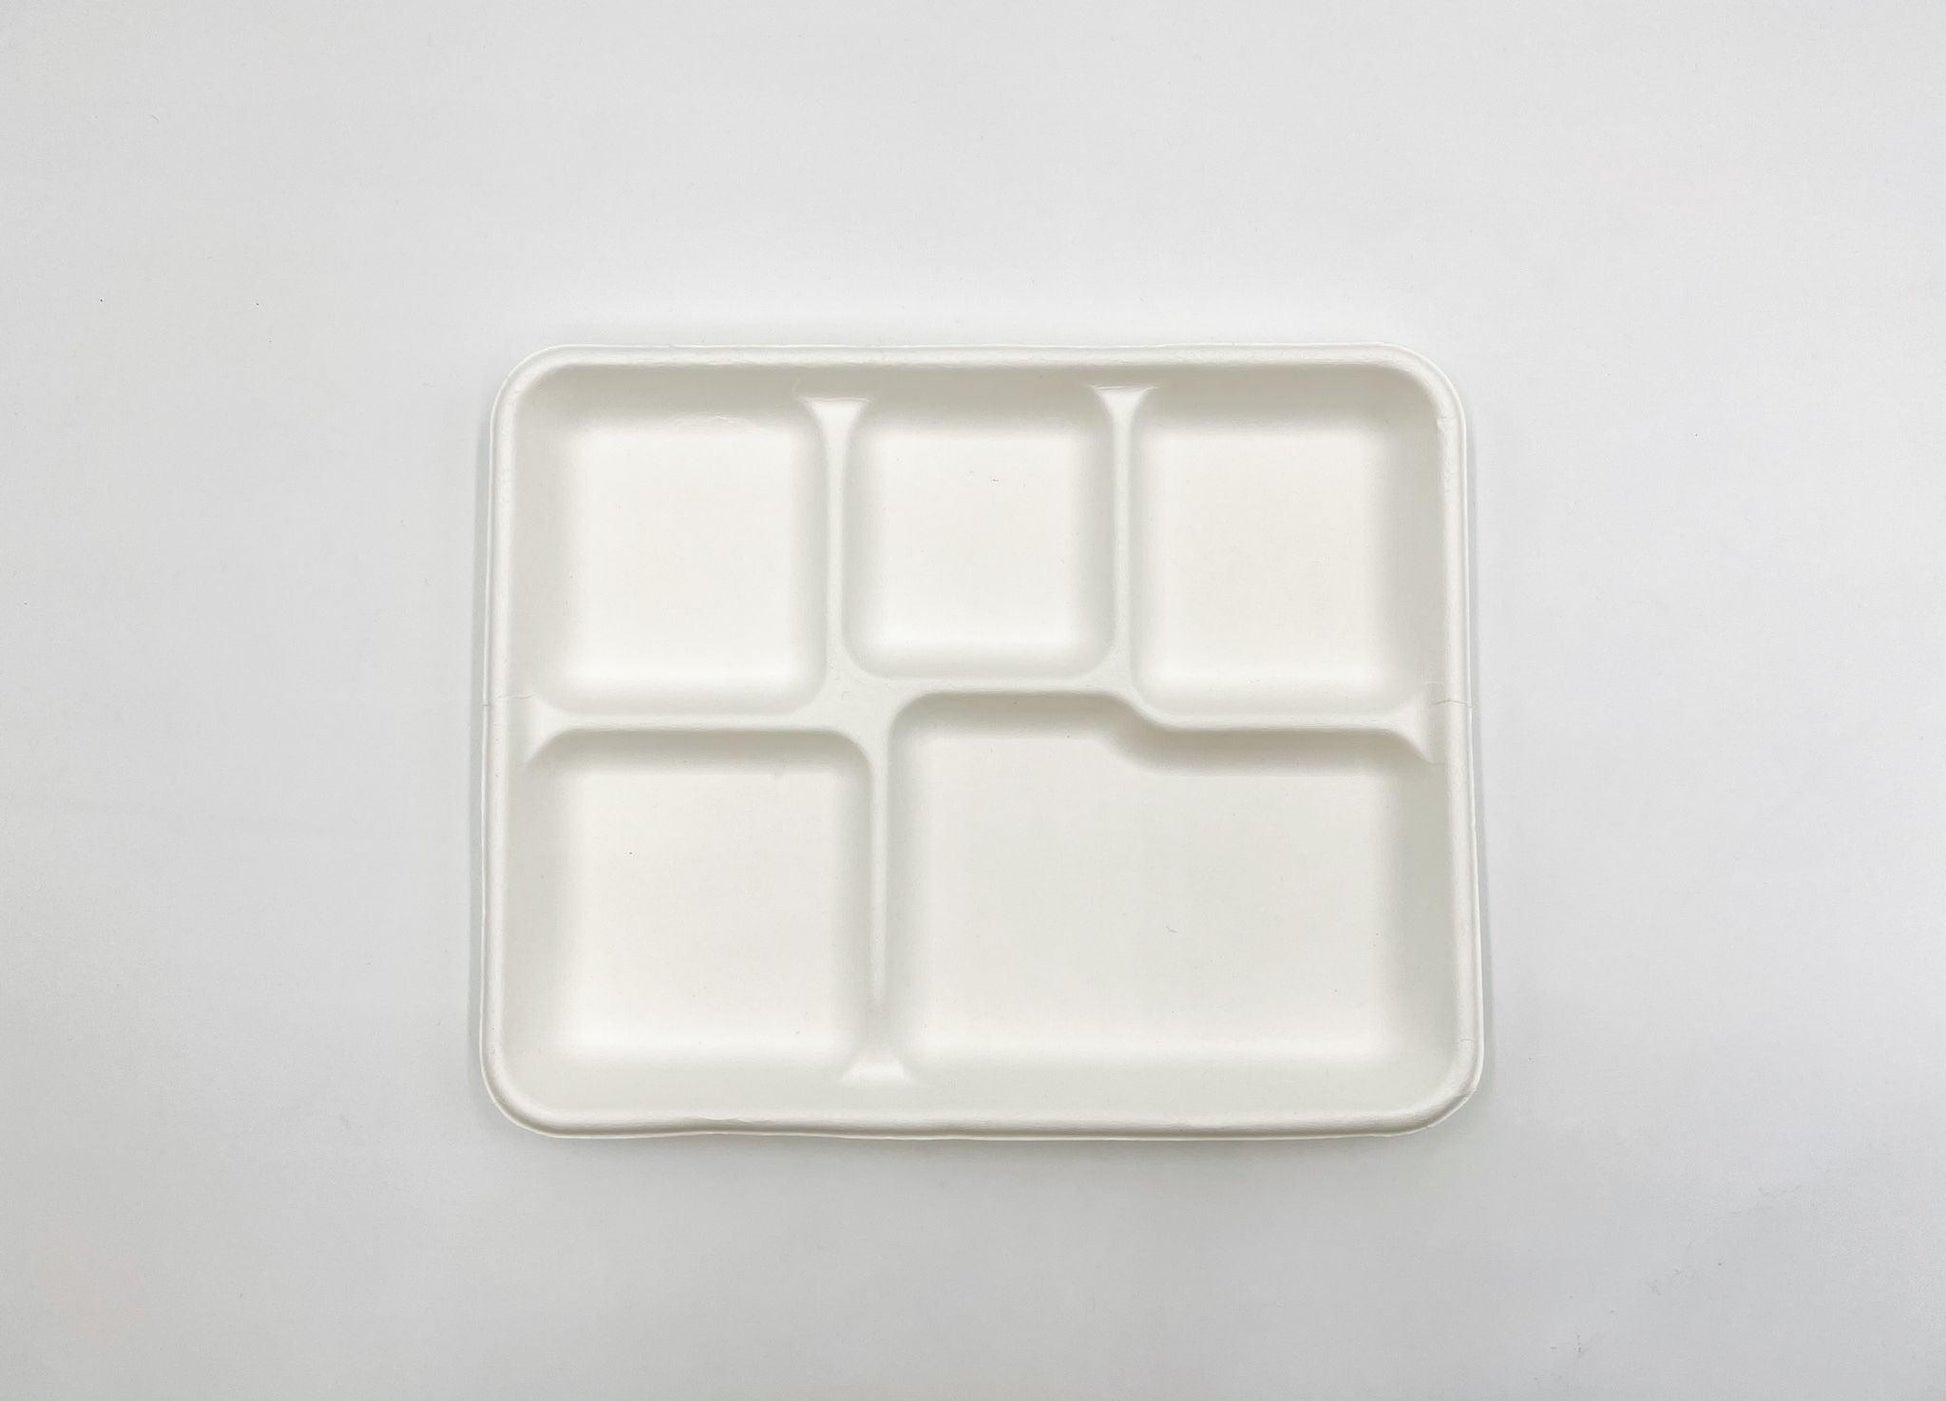 Disposable Food Trays with Compartments